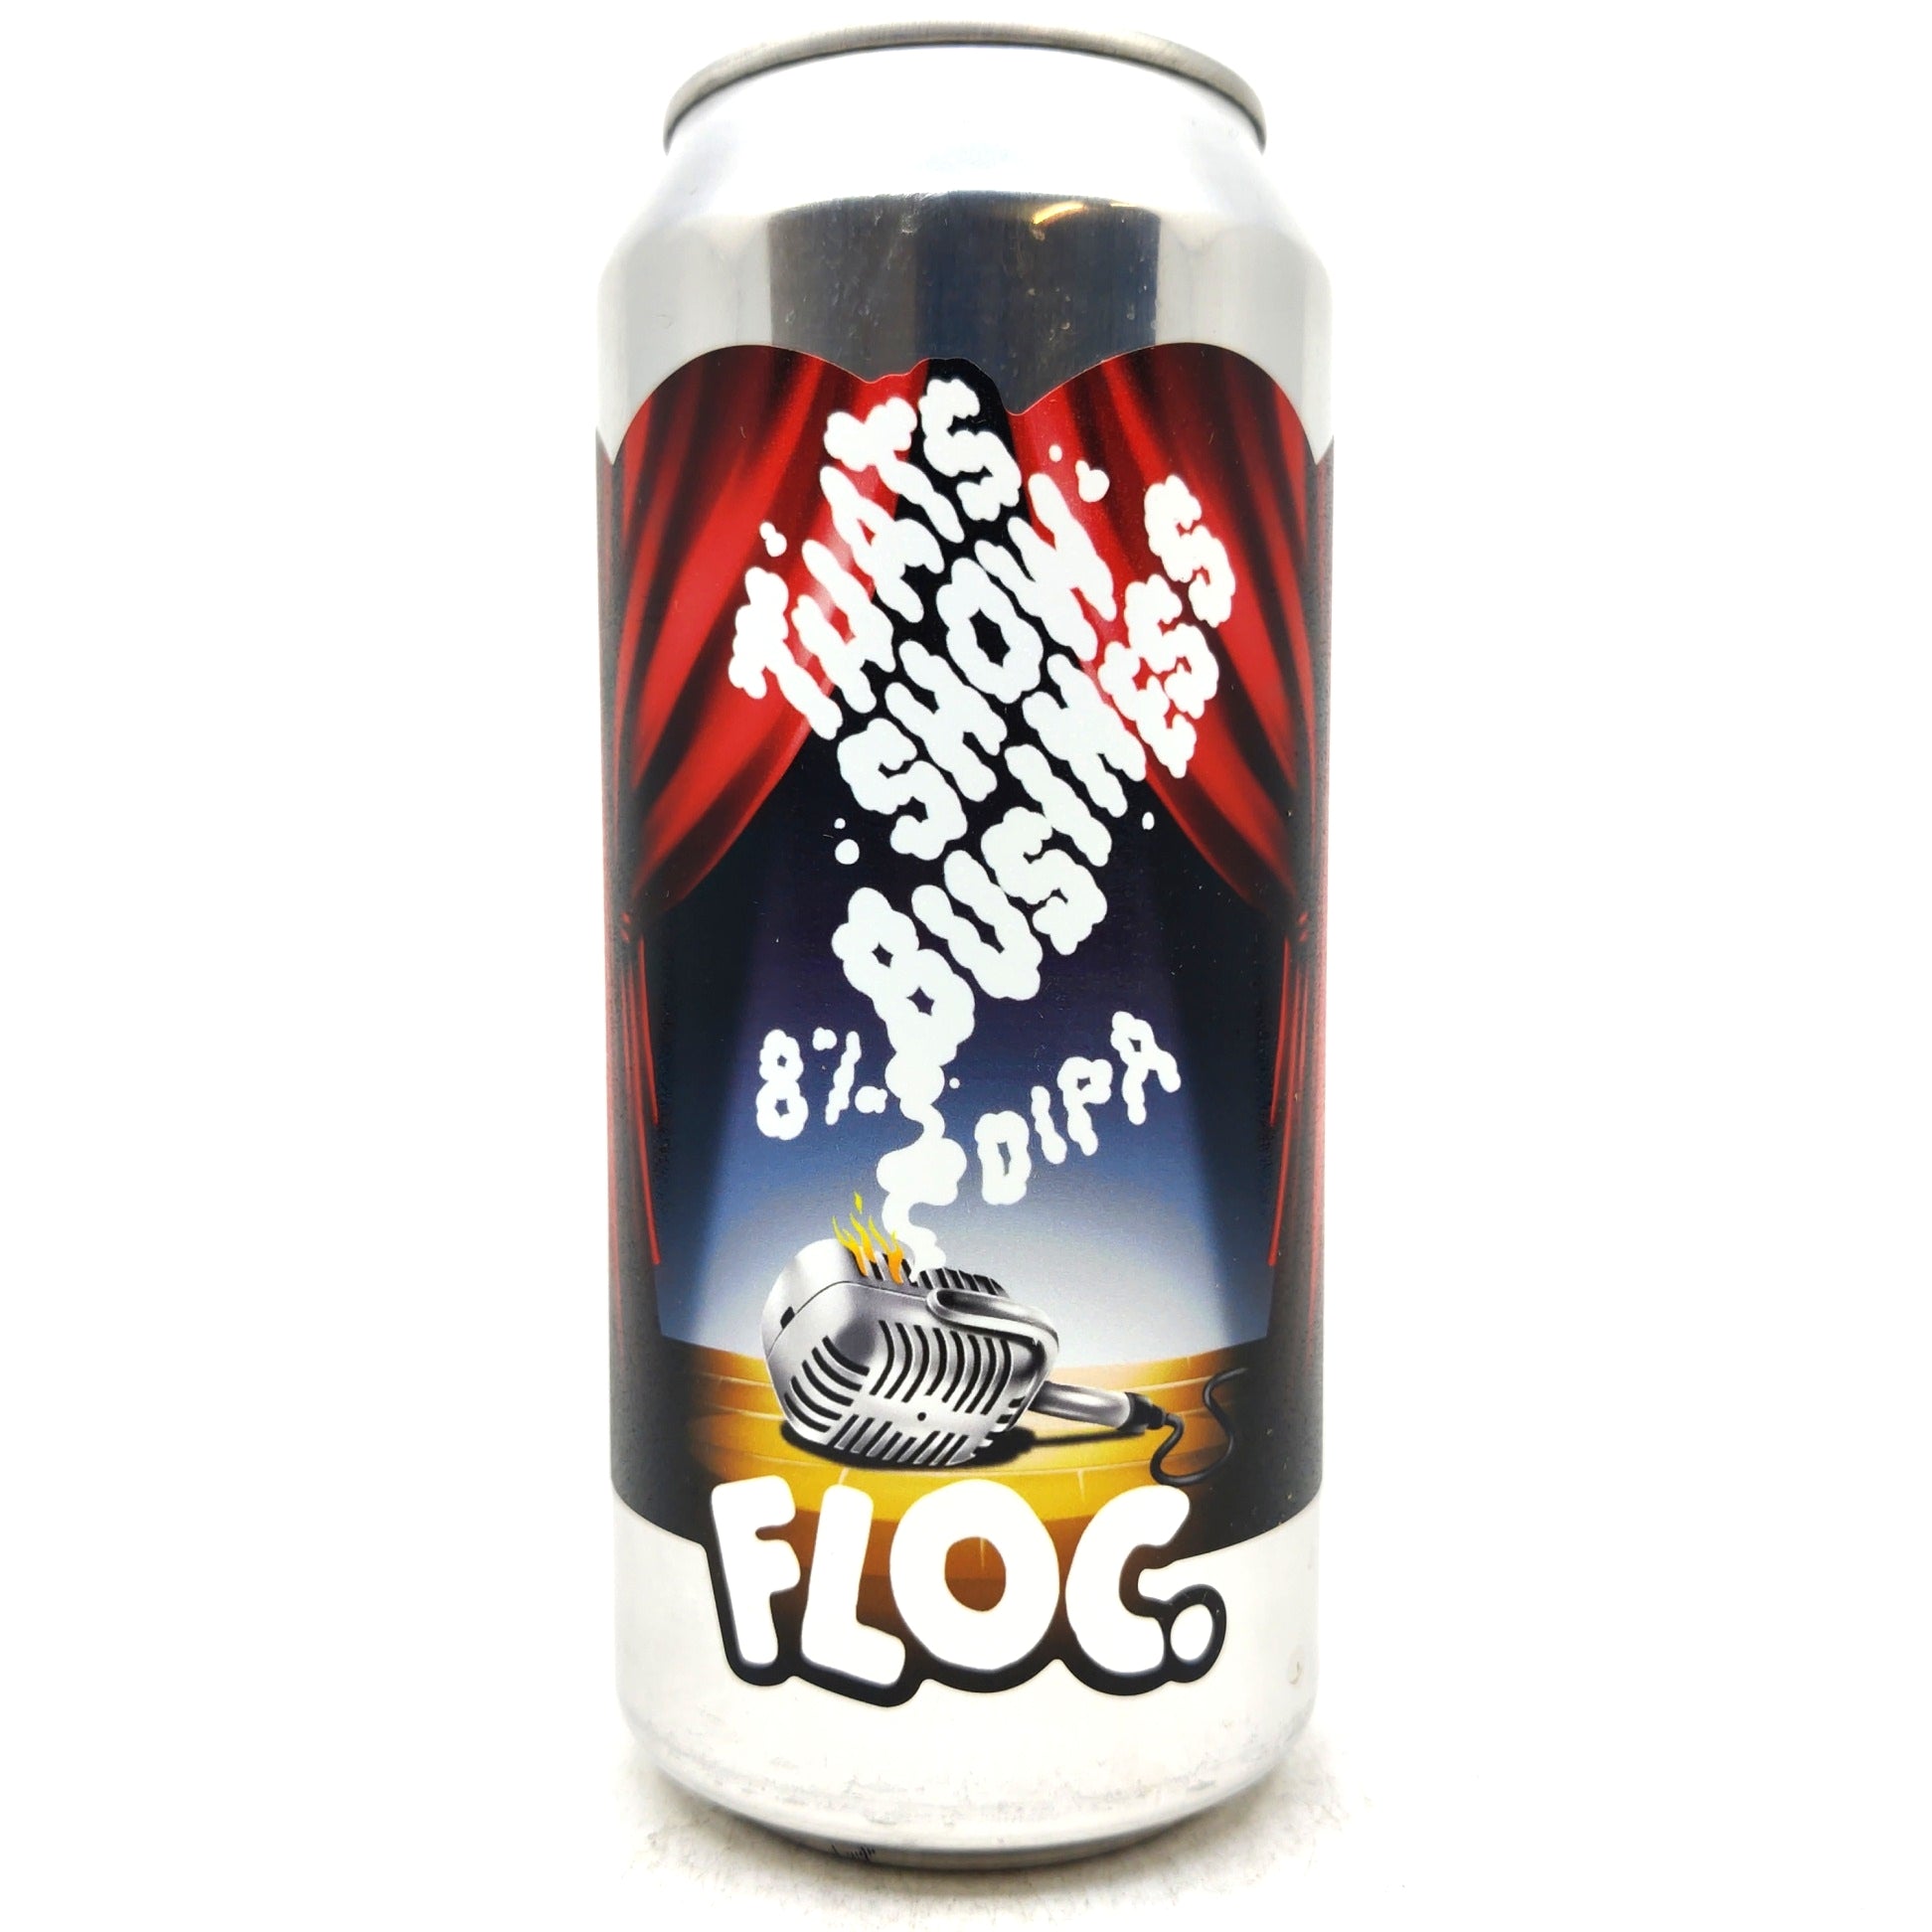 Floc Brewing That's Show Business Double IPA 8% (440ml can)-Hop Burns & Black